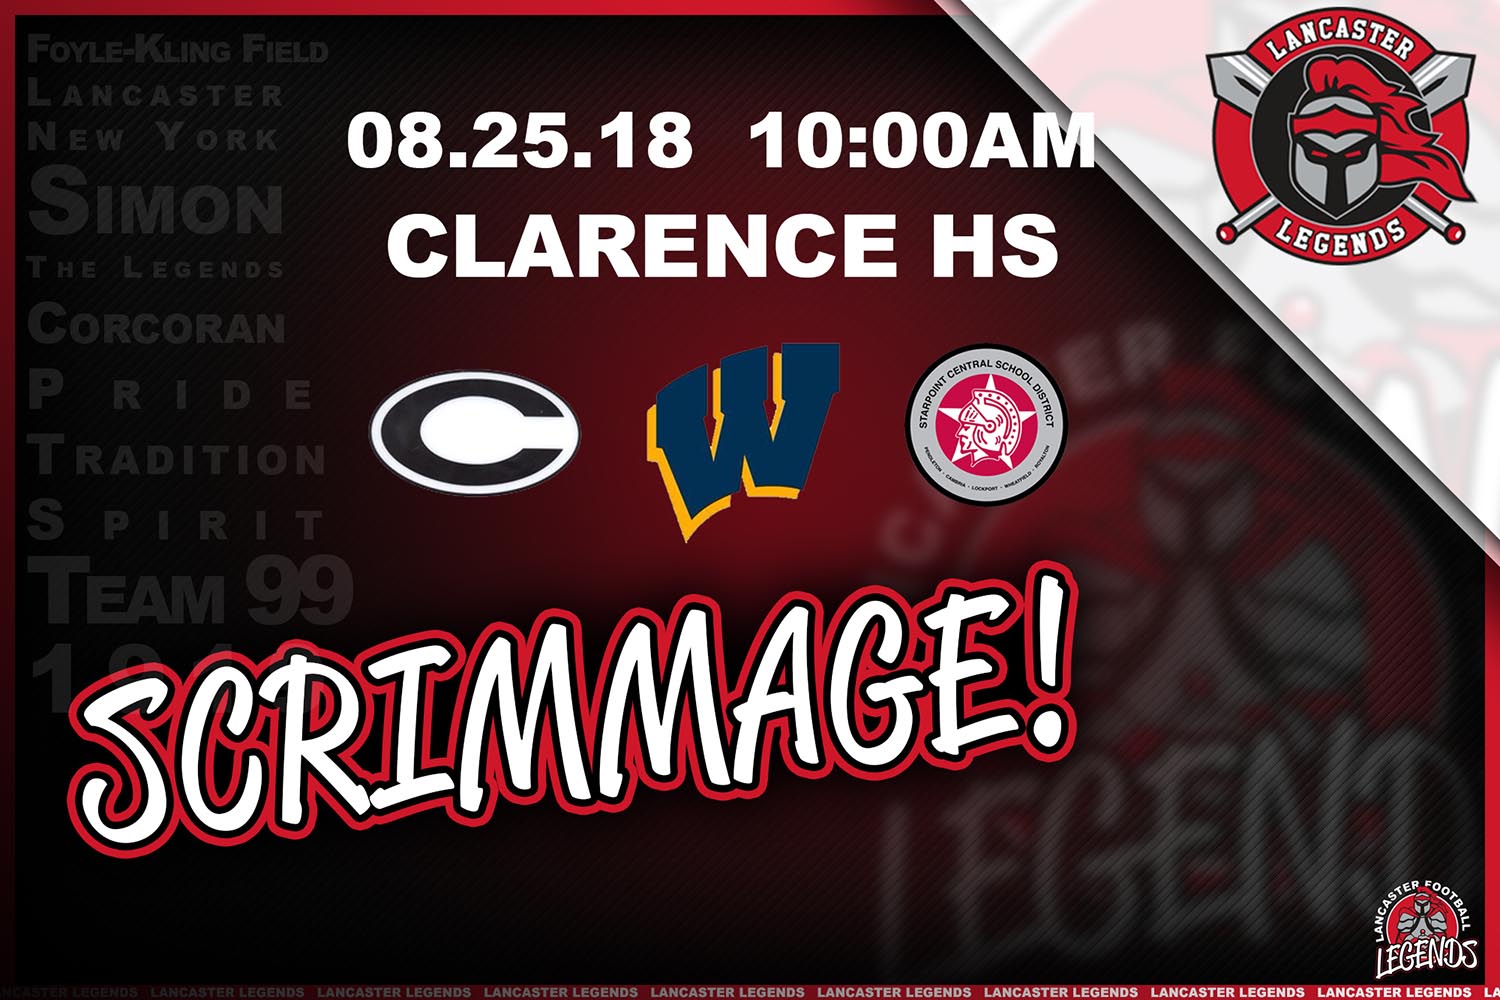 Scrimmage at Clarence HS